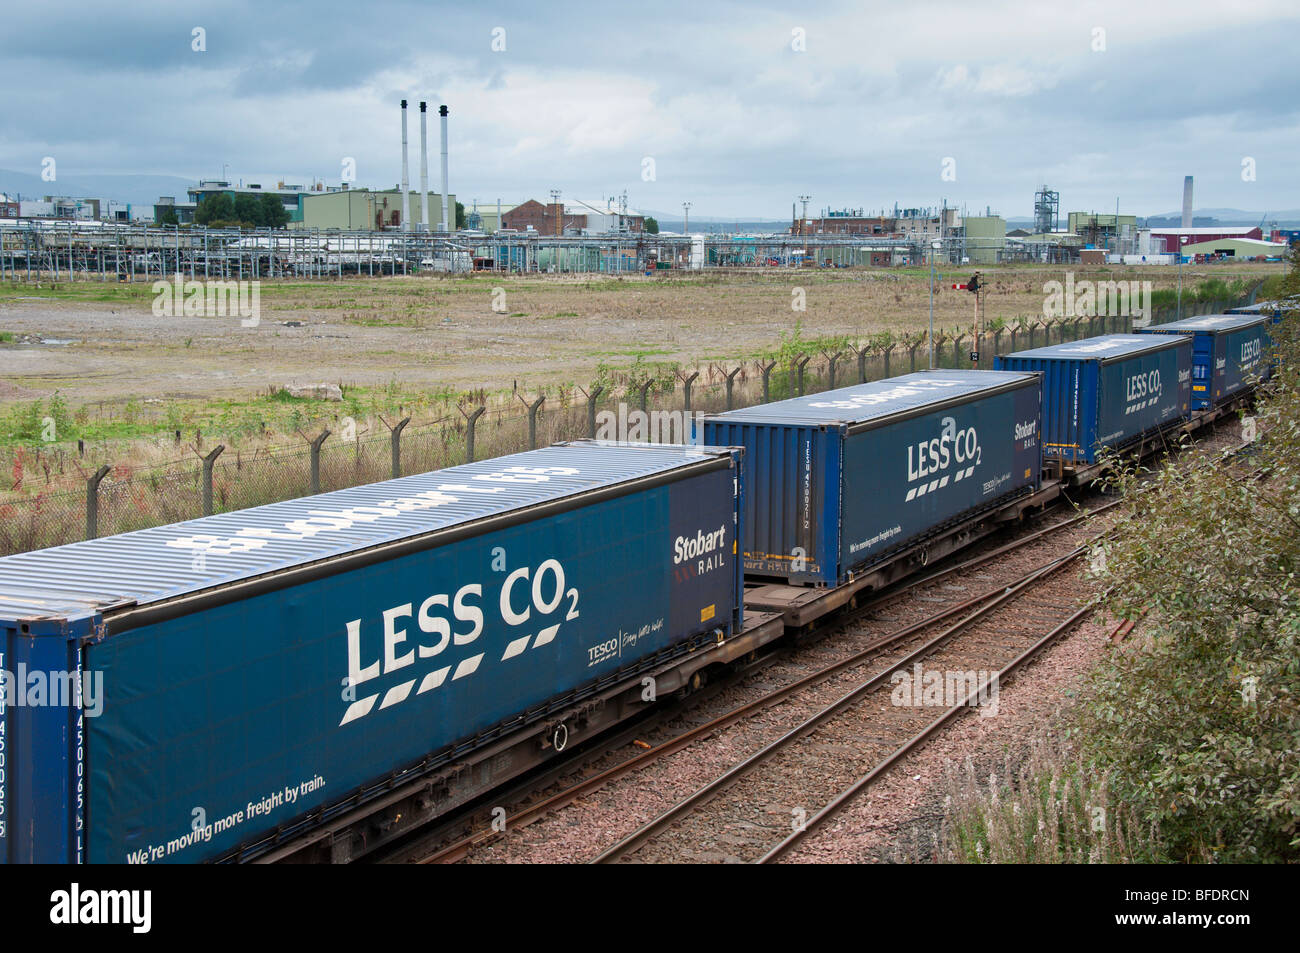 Tesco rail transport containers for supermarket goods with Less CO2 label at Grangemouth in Scotland with industry in background Stock Photo